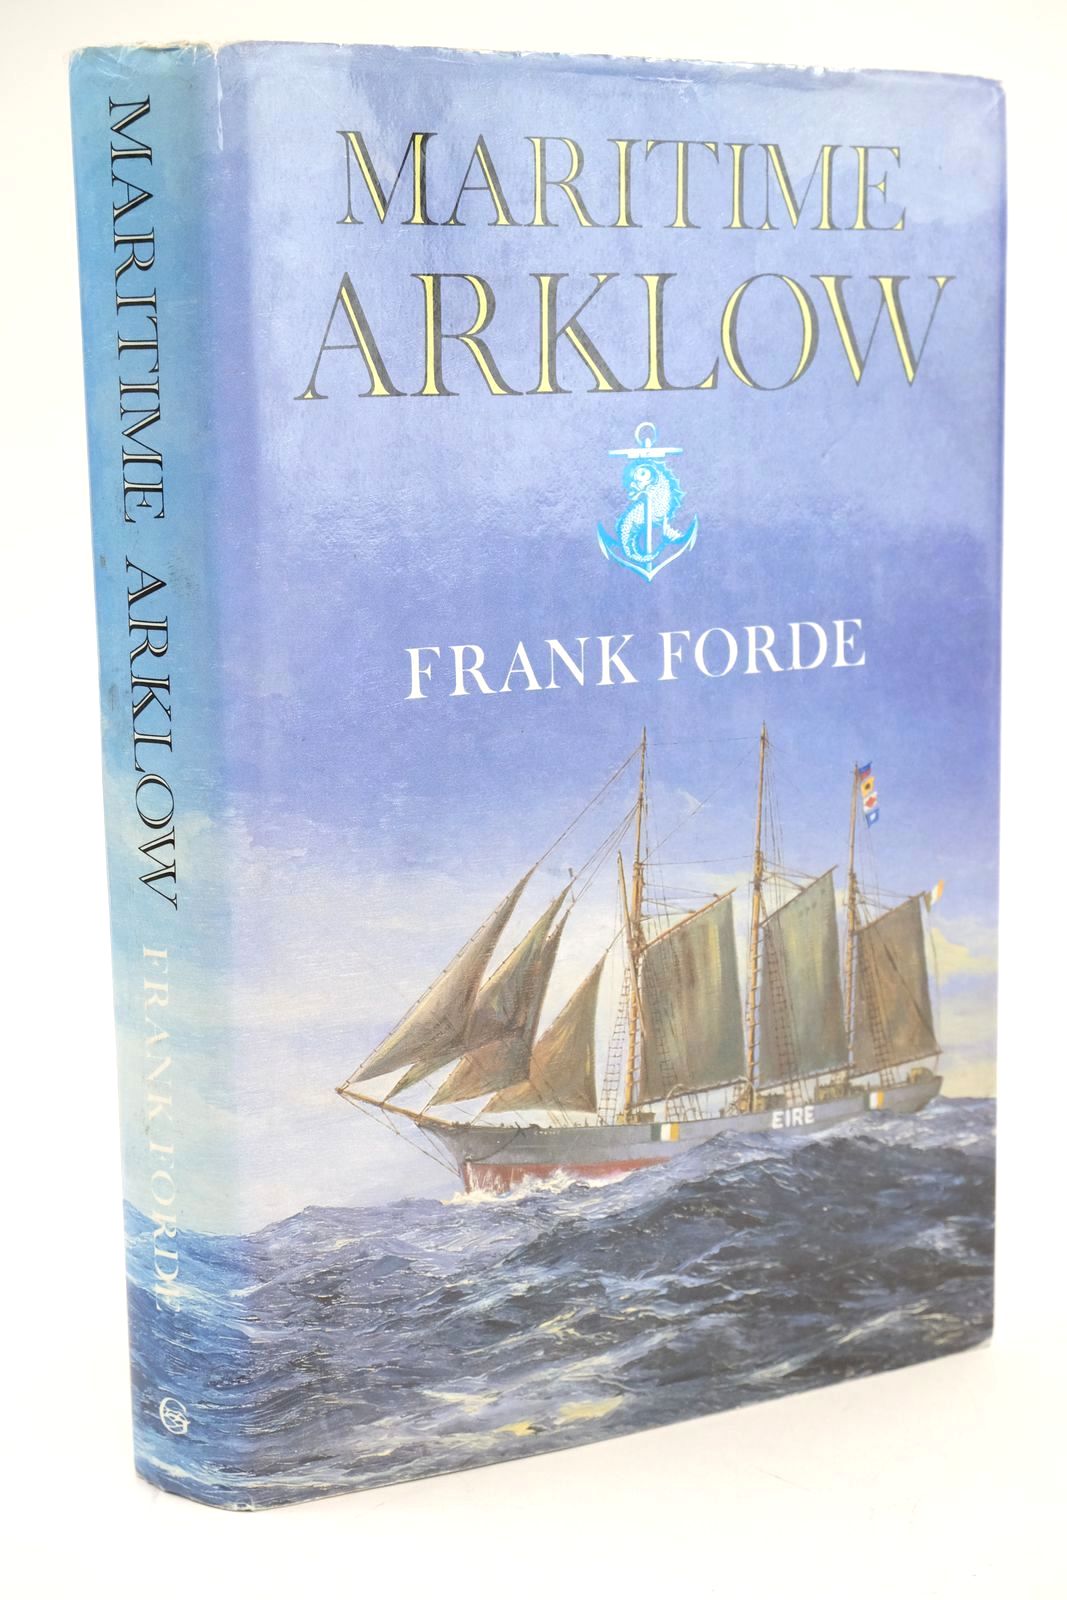 Photo of MARITIME ARKLOW written by Forde, Frank published by The Glendale Press Ltd. (STOCK CODE: 1324733)  for sale by Stella & Rose's Books